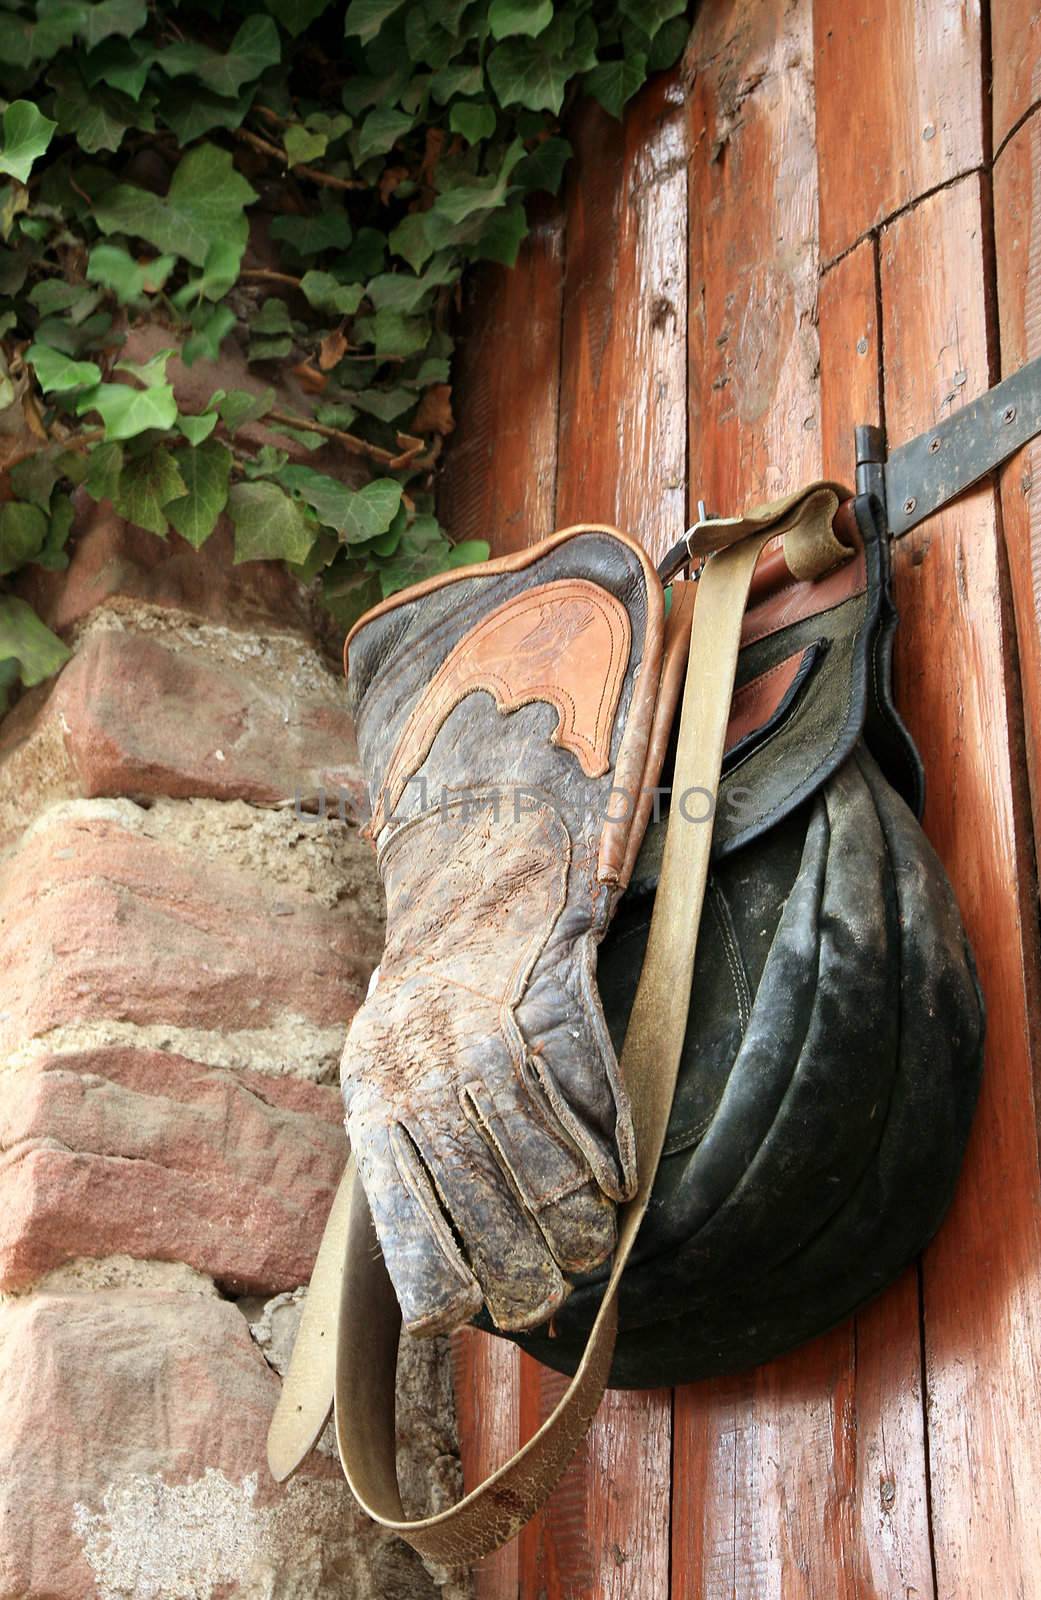 Equipment  the falconer - the leather bag and the glove - hanging on the gate in the Château de Kintzheim  (The Eagles' Nest’ )